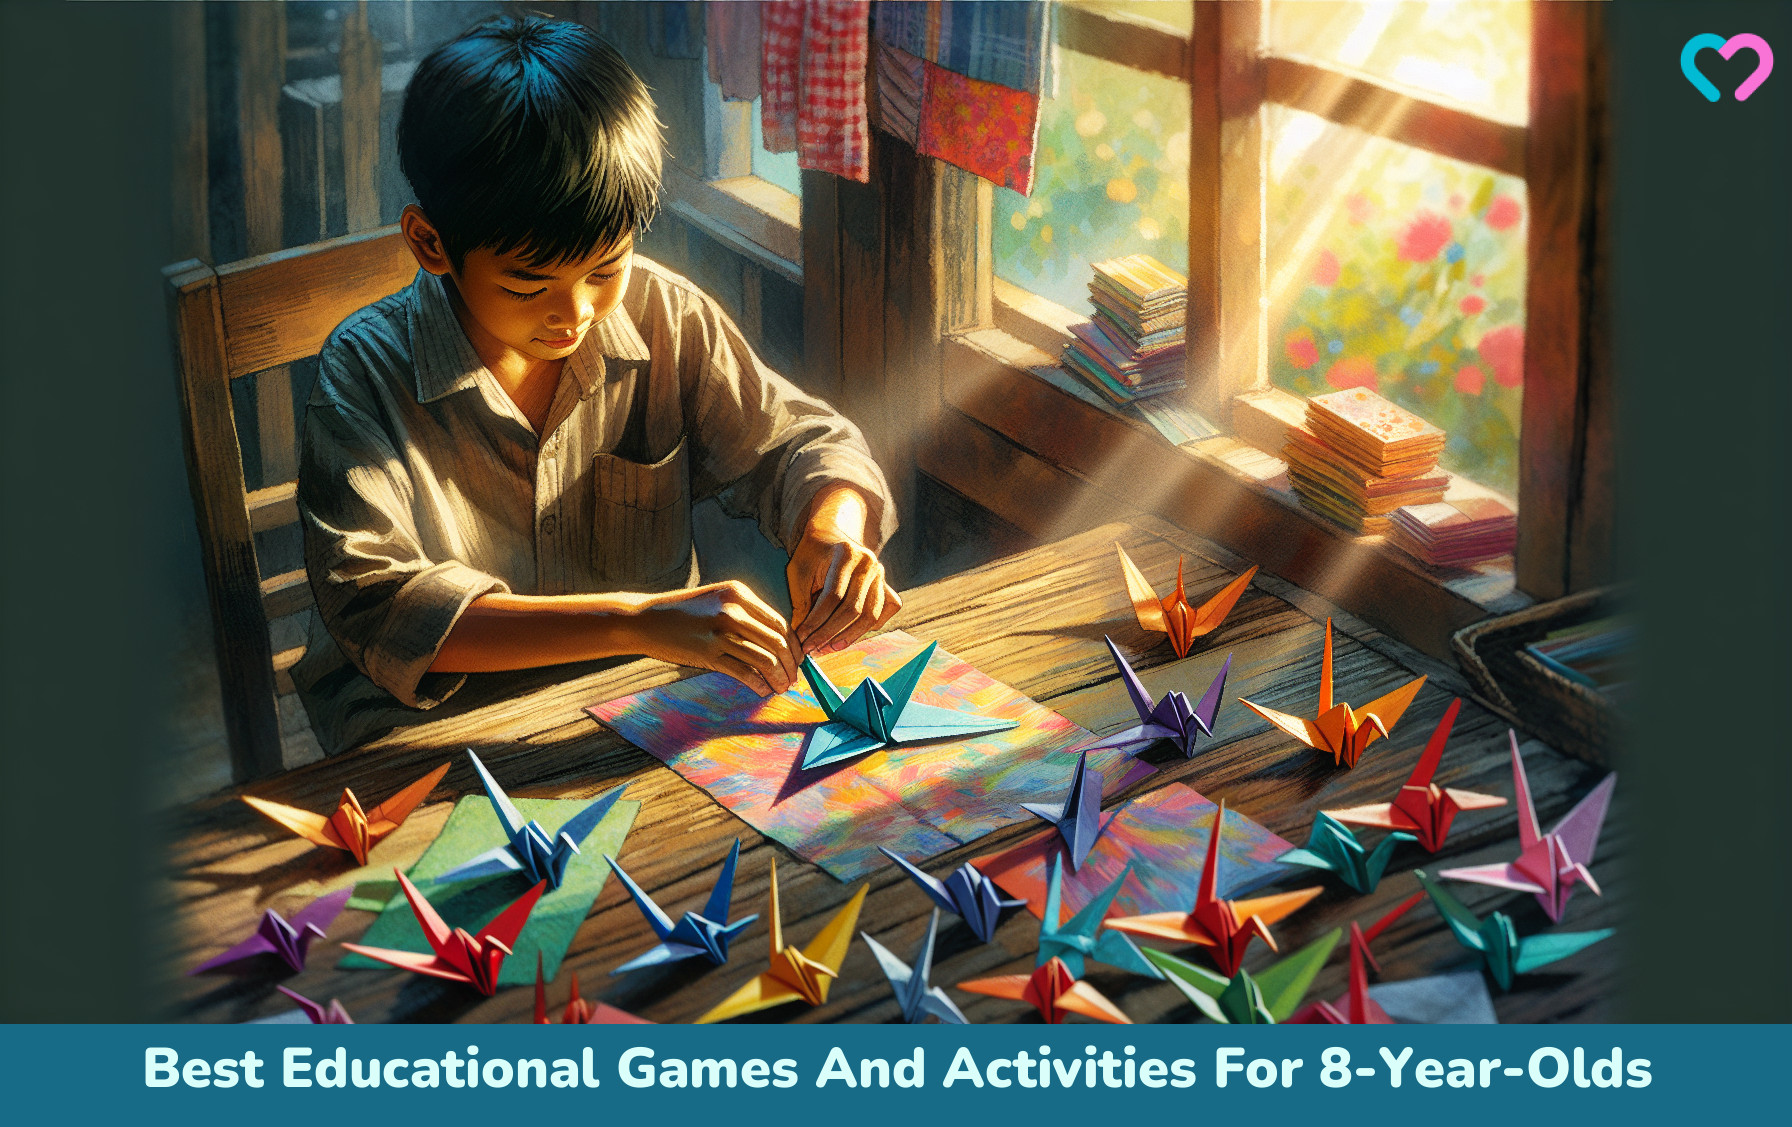 Activities For 8-Year-Olds_illustration